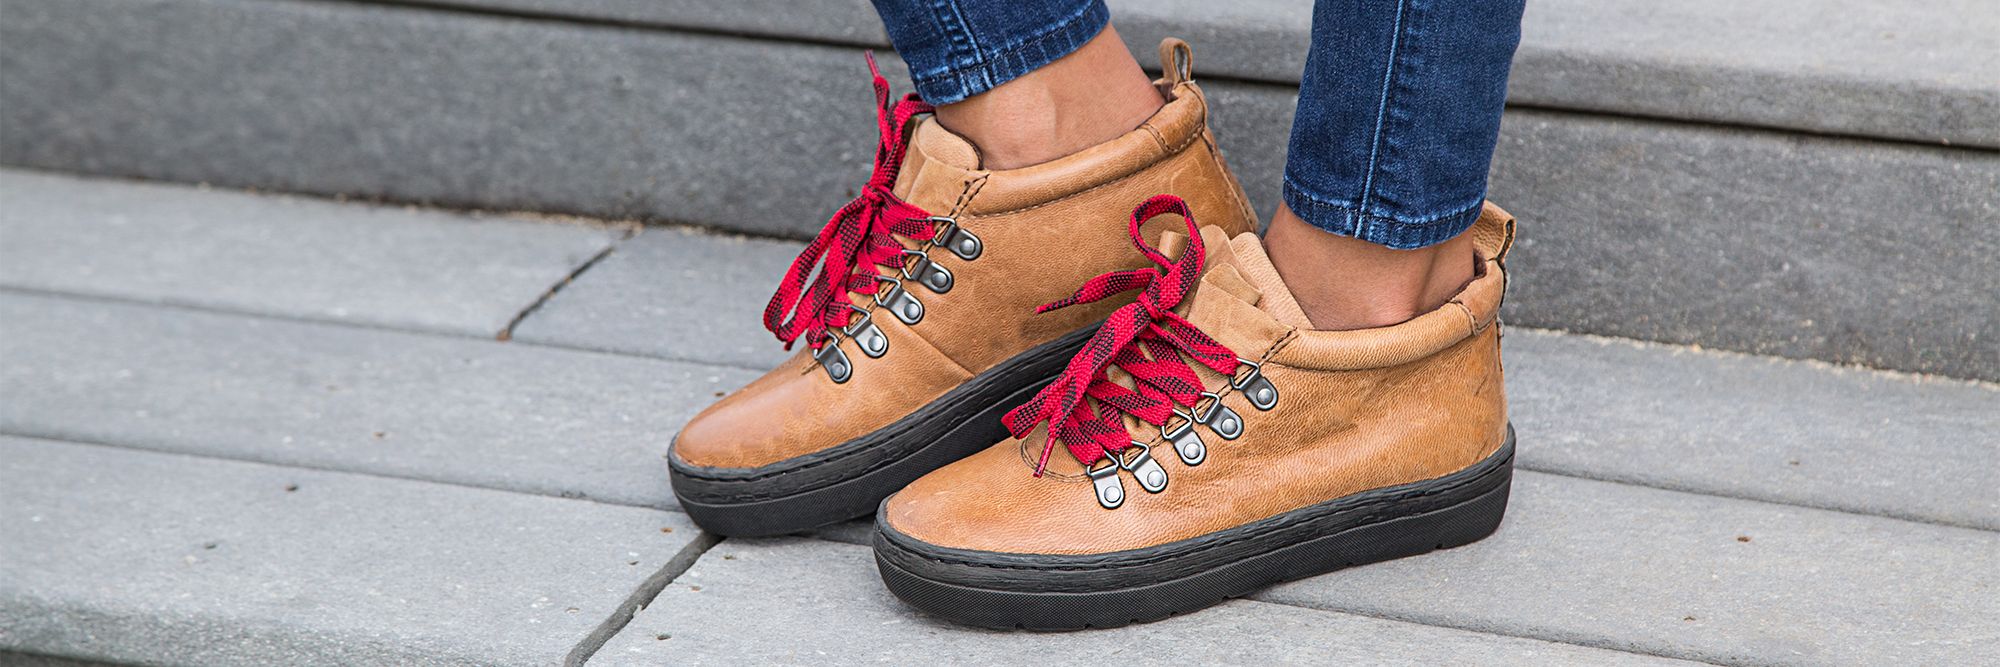 Here's three fun and easy ways you can style your hiking sneakers for fall!